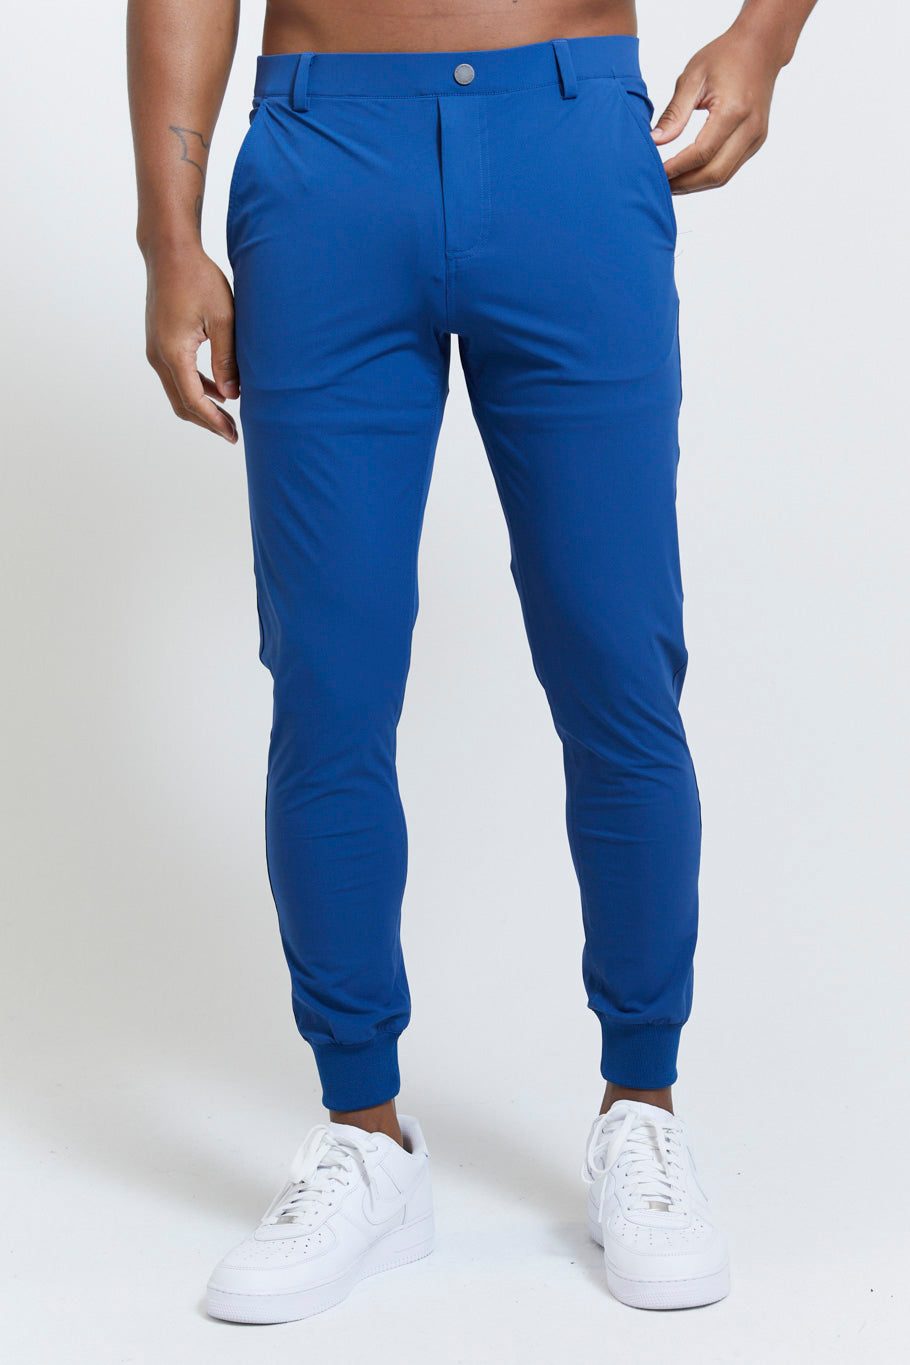 Image of the halliday pull-on jogger in admiral